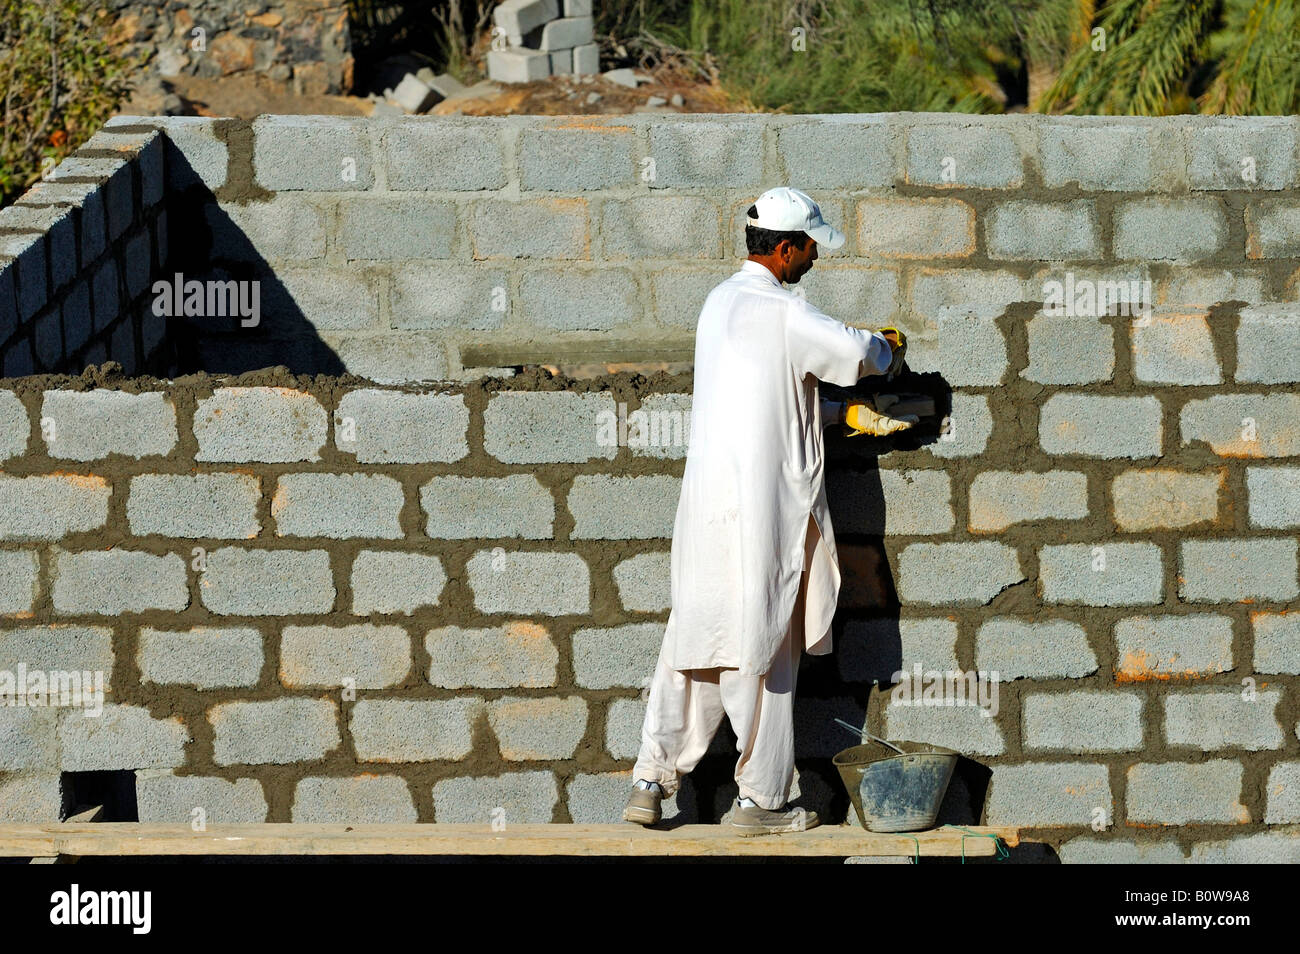 Bricklayer building a house in Misfah al-Ibriyeen, Oman, Middle East Stock Photo